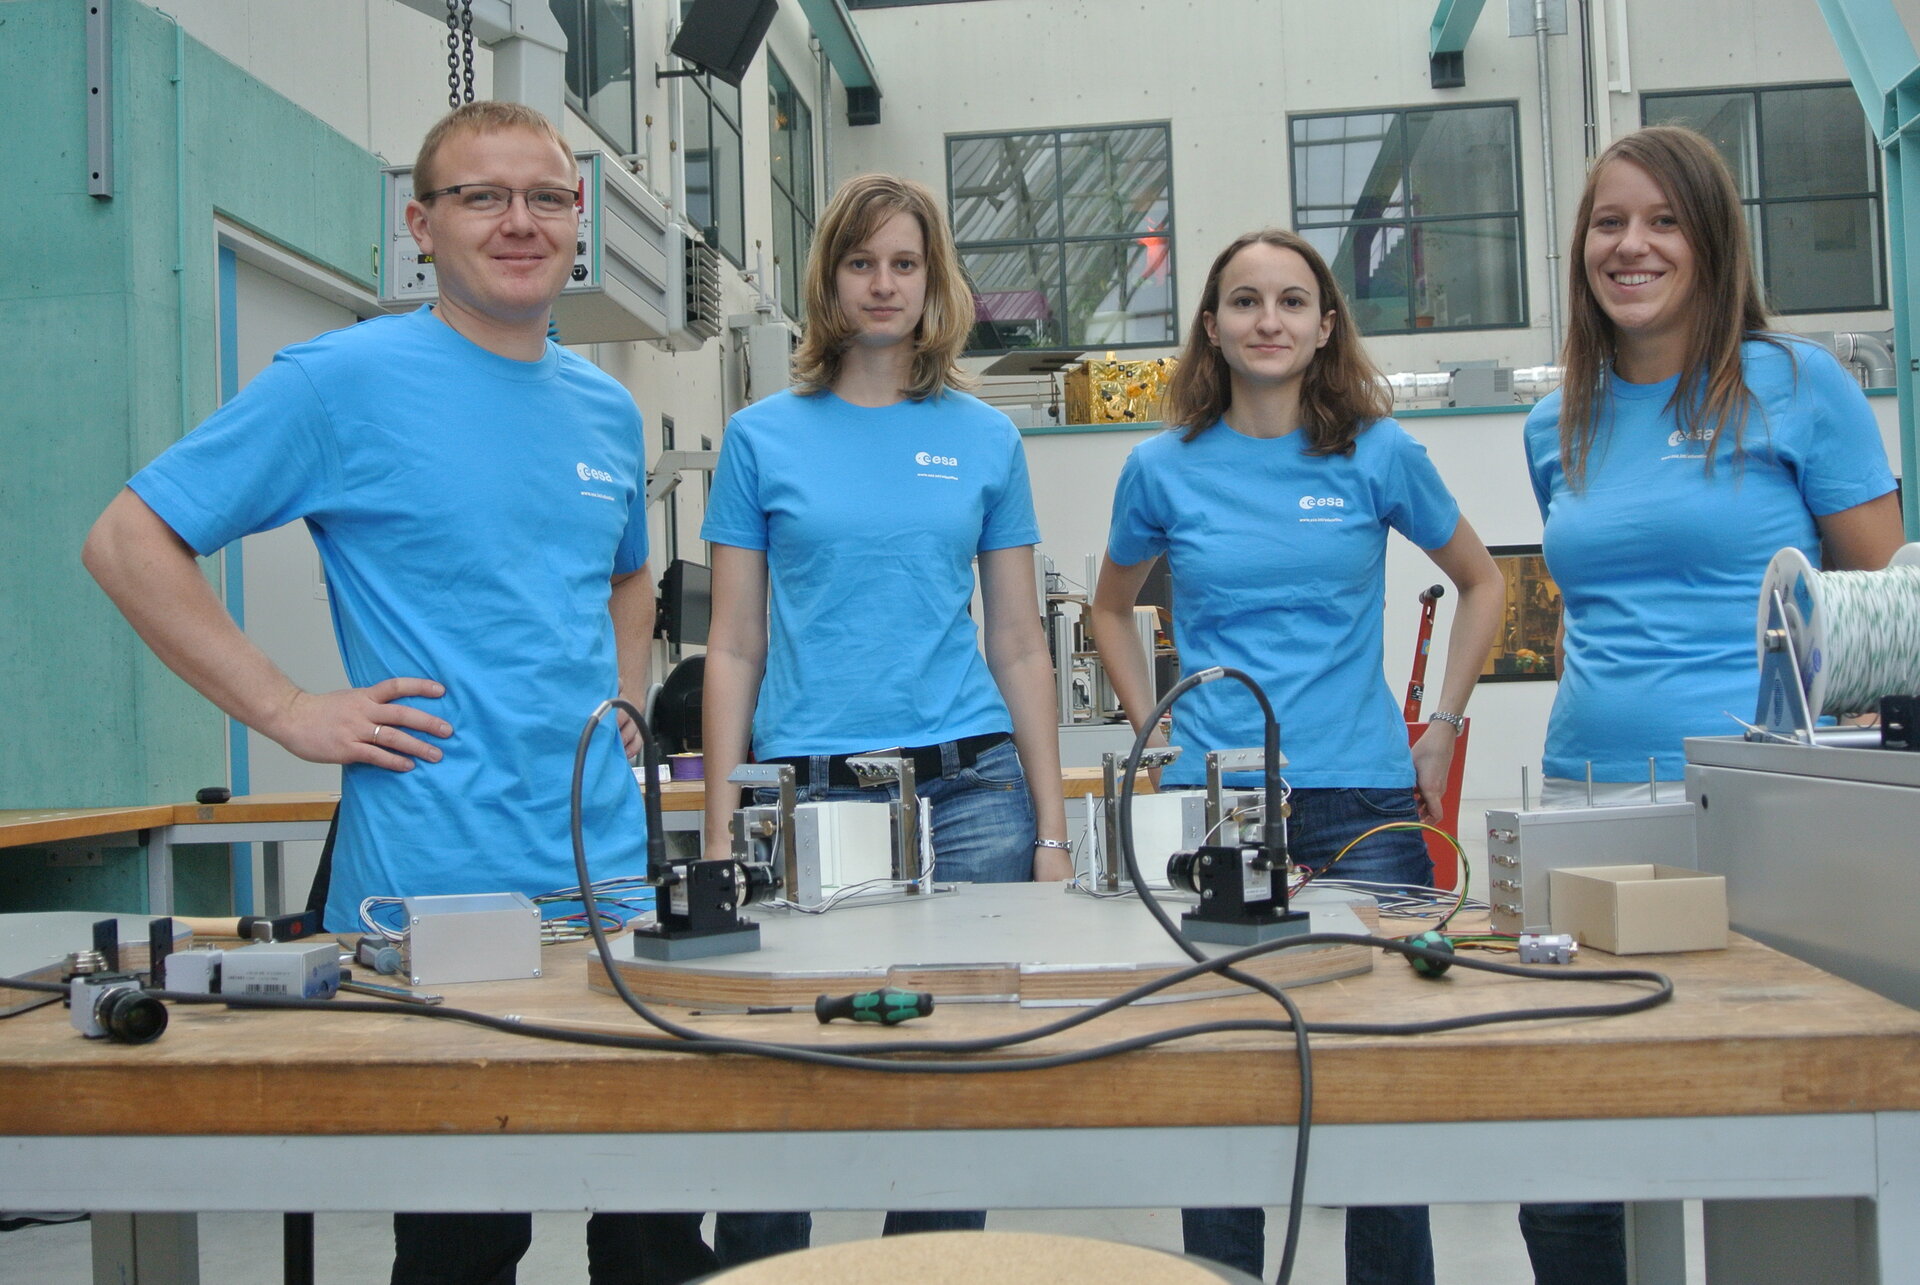 The GAGa DropT team with their experiment DYT 2012